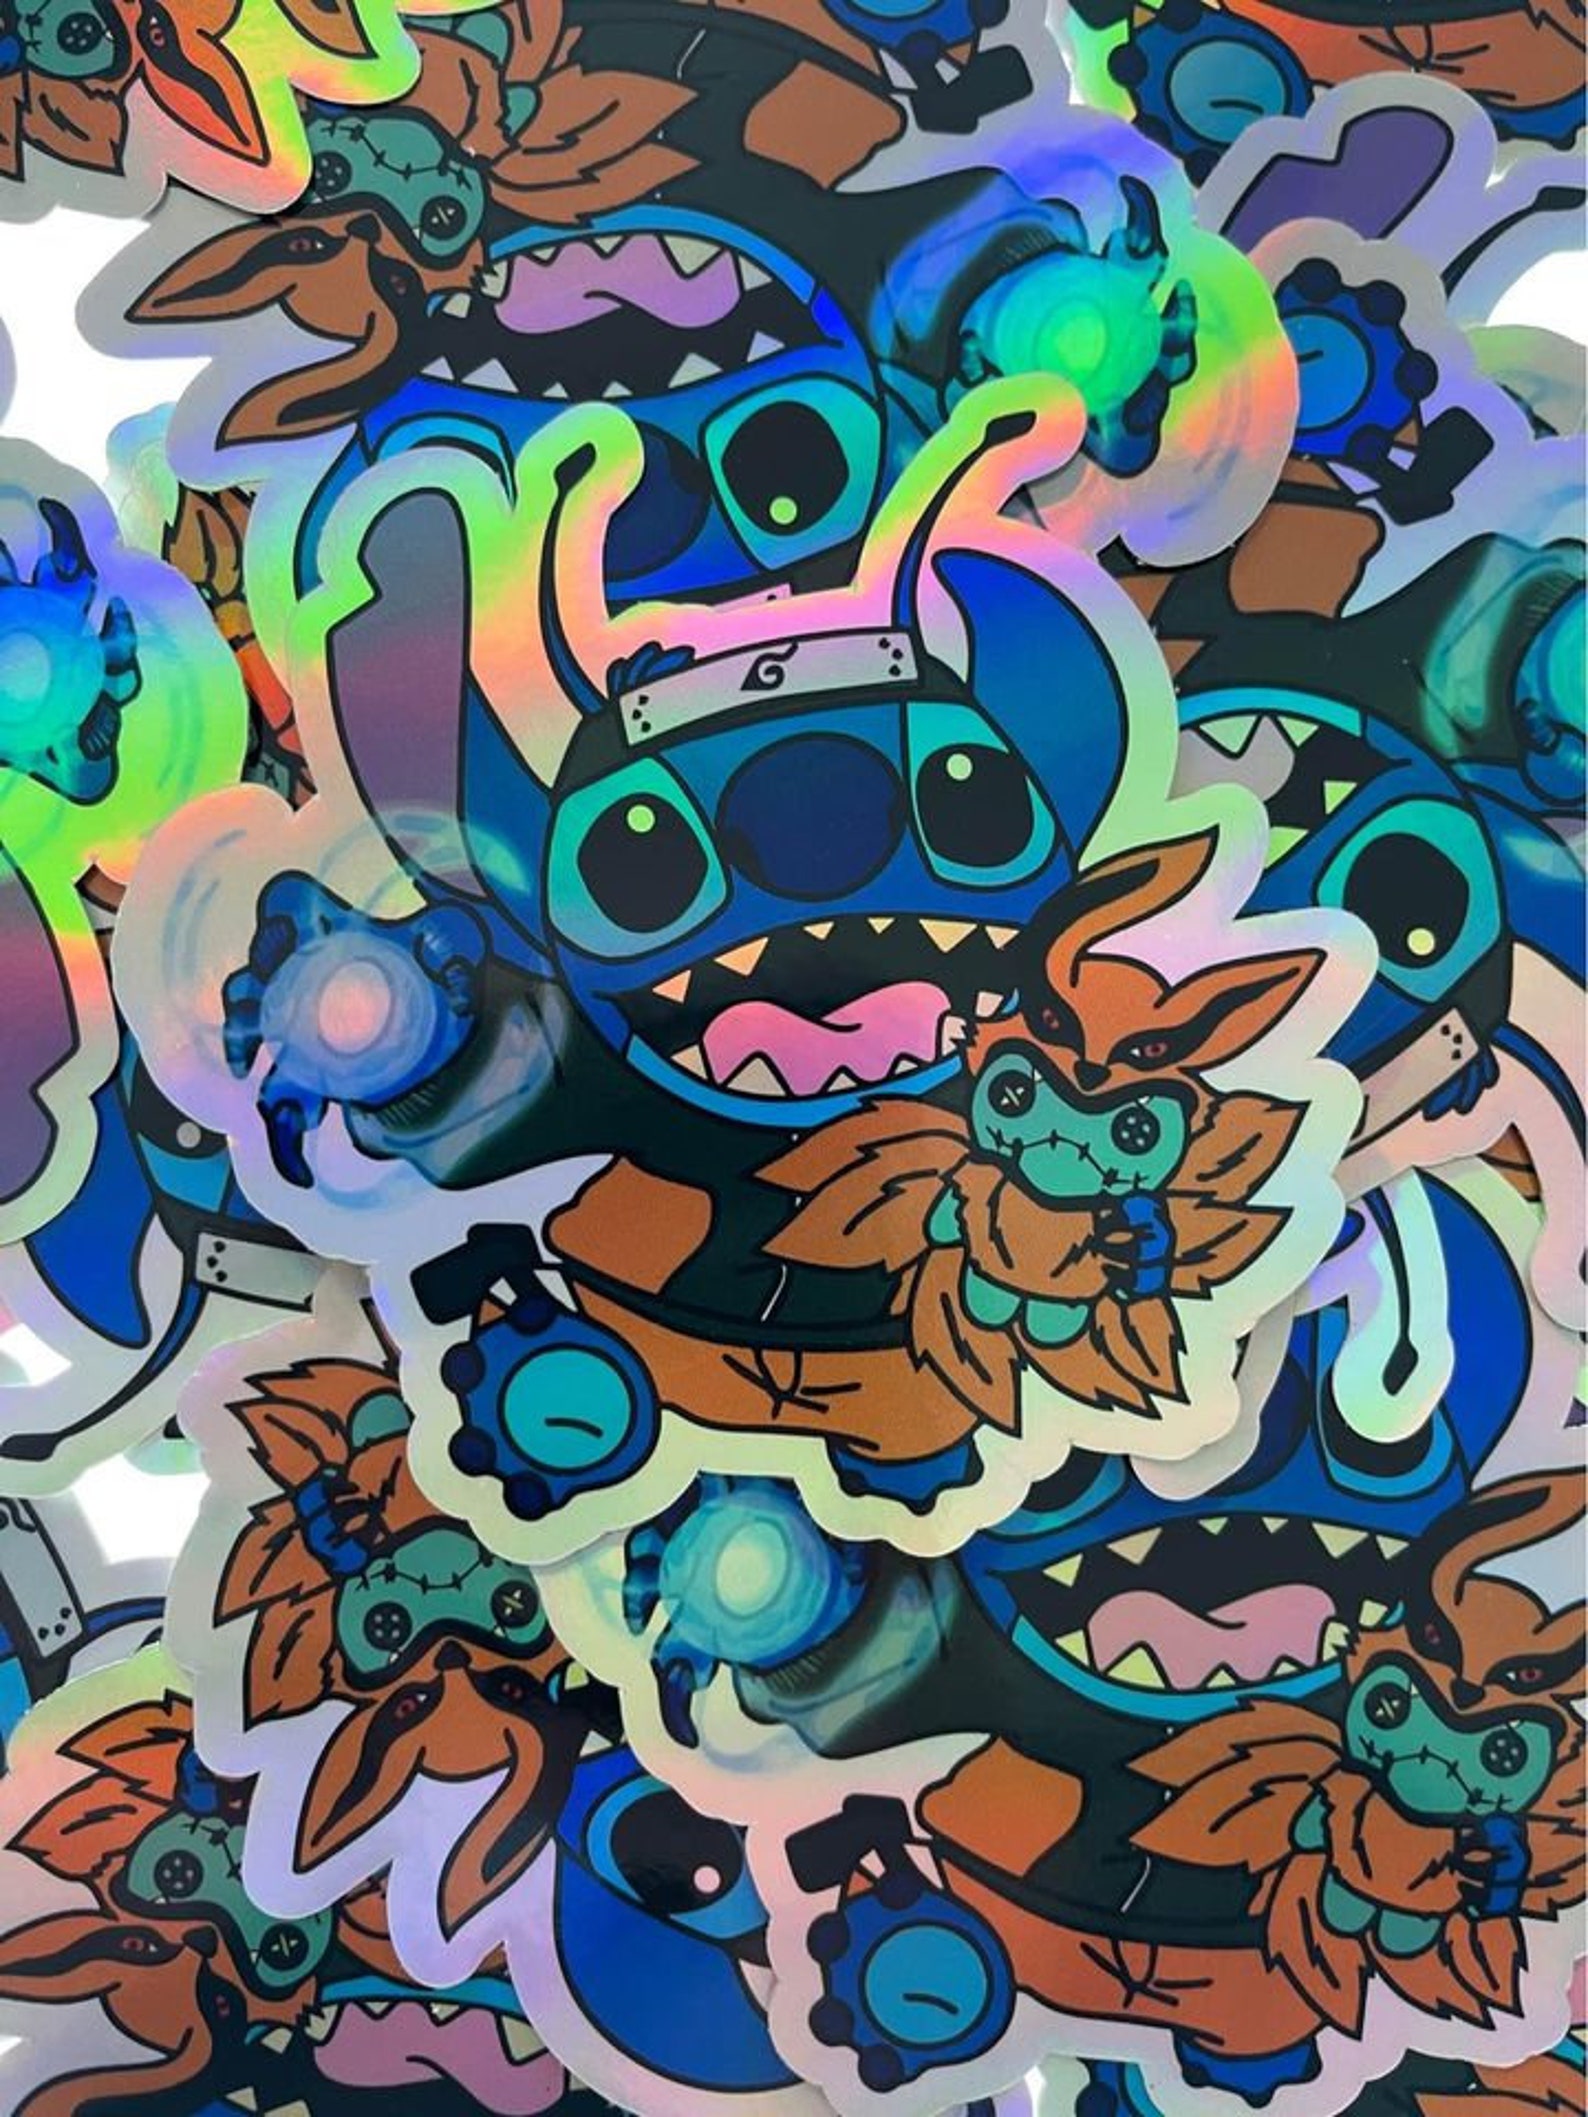 Stitch as Naruto Holographic Sticker Anime Funny Cute | Etsy